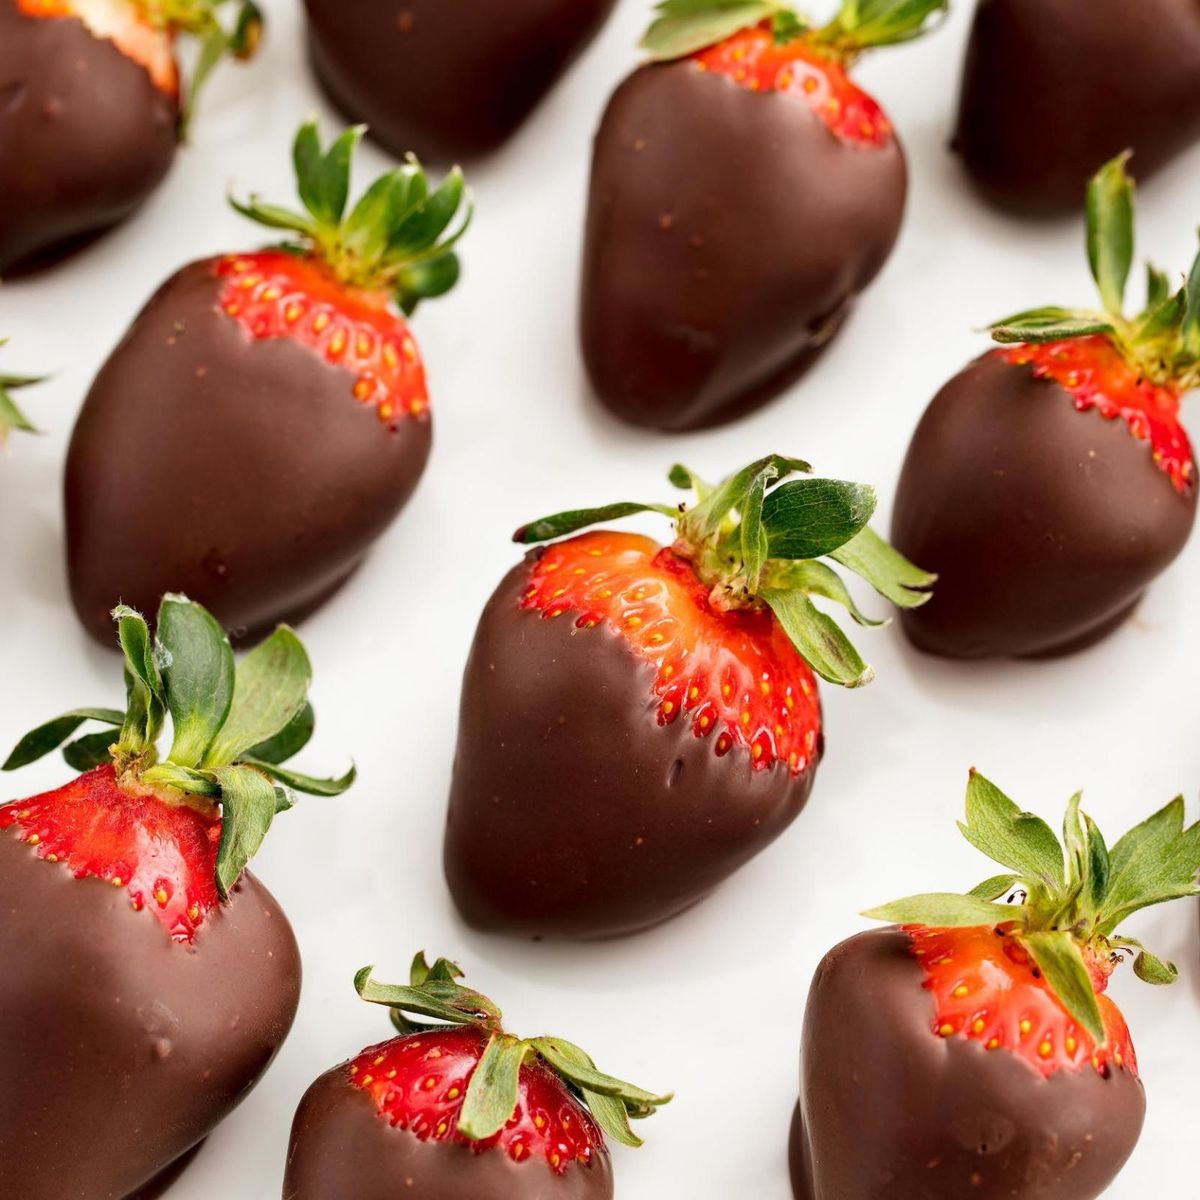 Top 3 Chocolate Covered Strawberries Recipes